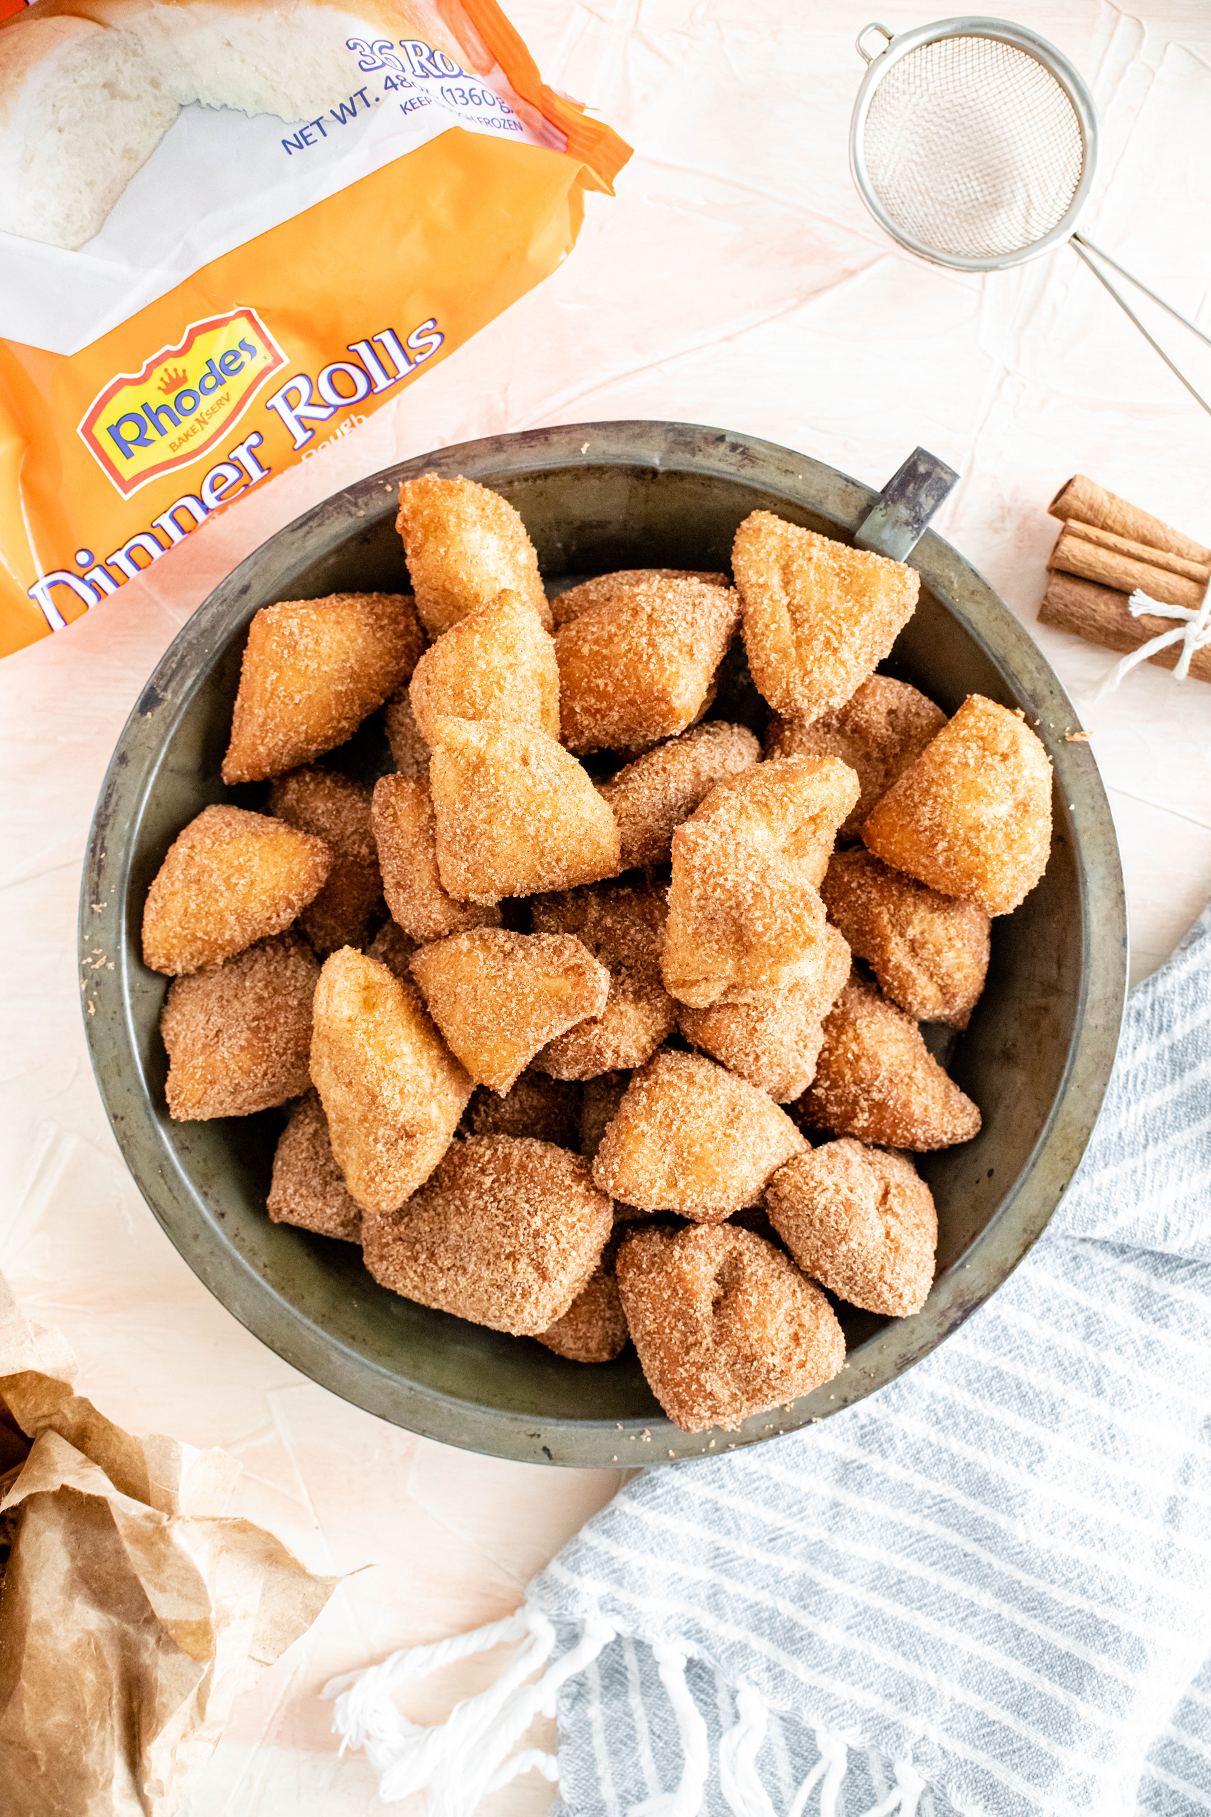 Vintage pie plate filled with cinnamon sugar donut holes.